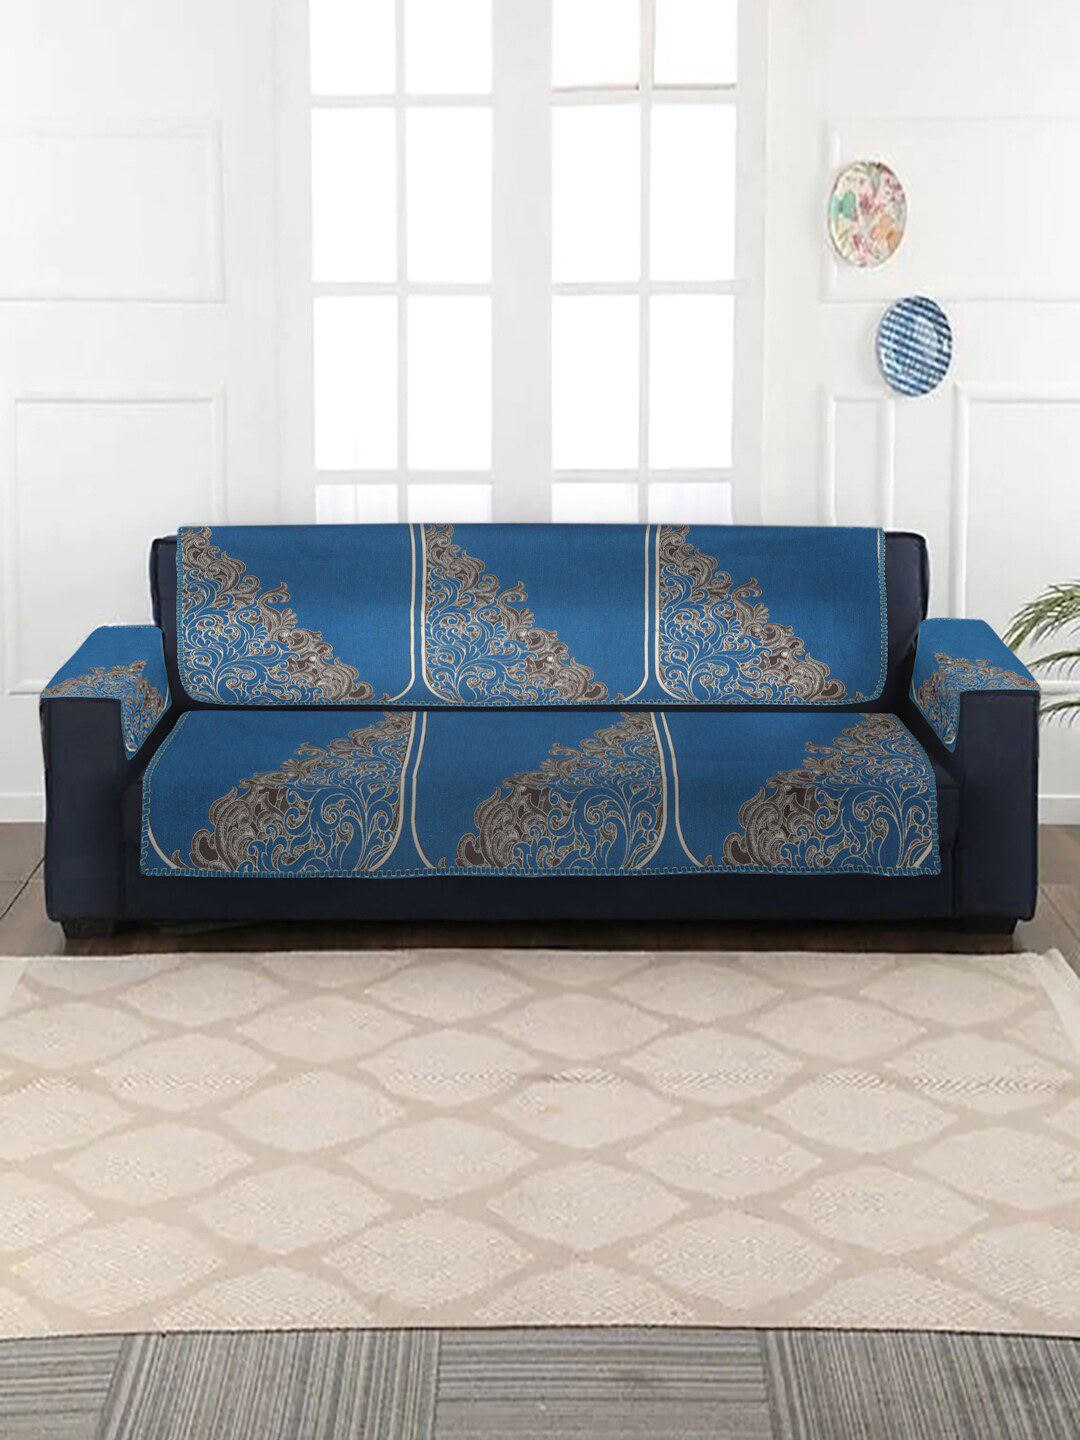 MULTITEX Set of 16 Blue Jacquard 5 Seater Sofa Covers with Arm Covers Price in India